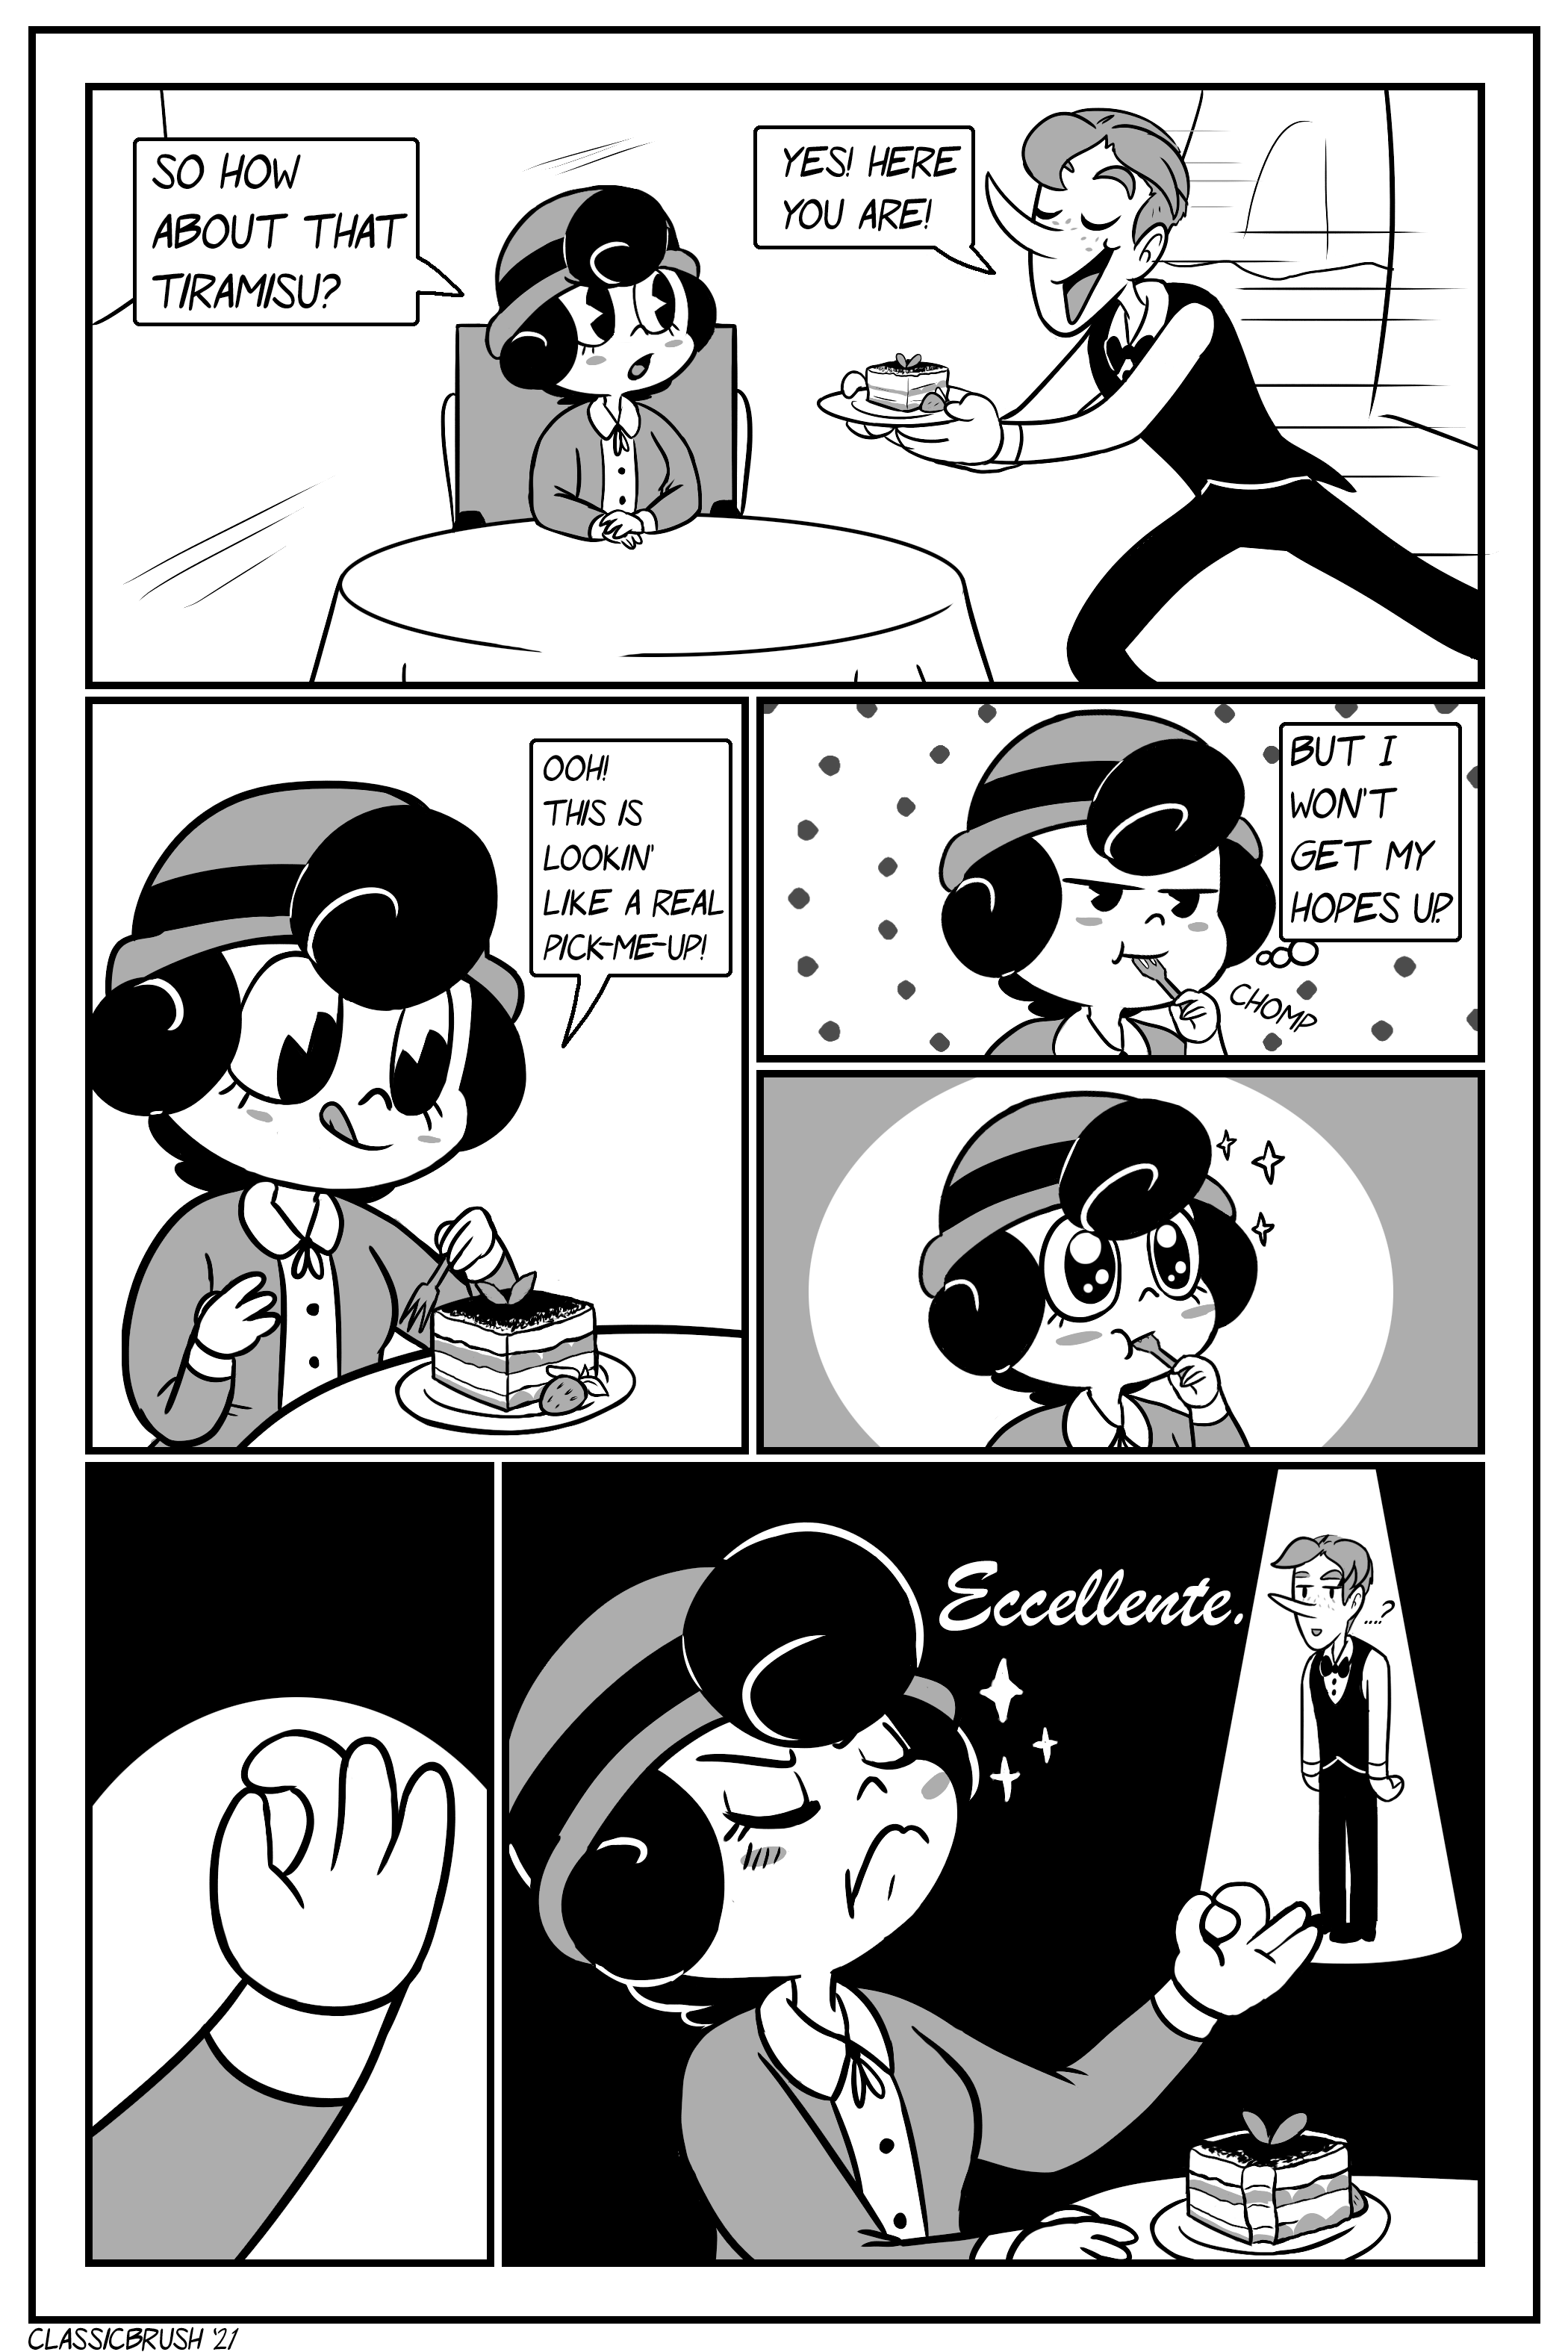 Panel 1:  Audrey sits at the table with an impatient expression. â€œSo how about that Tiramisu?â€  Harrison rushes in from the right with a plate of tiramisu. â€œYes!  Here you are!â€  Panel 2:  Audrey holds a fork, licking her lips while looking down at the tiramisu. â€œOoh!  This is lookinâ€™ like a real pick-me-up!â€  Panel 3:  Audrey takes a bite of the tiramisu with an unenthusiastic expression. â€œBut I wonâ€™t get my hopes up.â€  Panel 4:  Audreyâ€™s eyes suddenly light up.  Panel 5:  Audreyâ€™s hand is shown making an Italian gesture for approval.  Panel 6:  Audrey is still seen holding out her hand in the foreground while Harrison is in the back looking confused.   Audrey says â€œEccellenteâ€